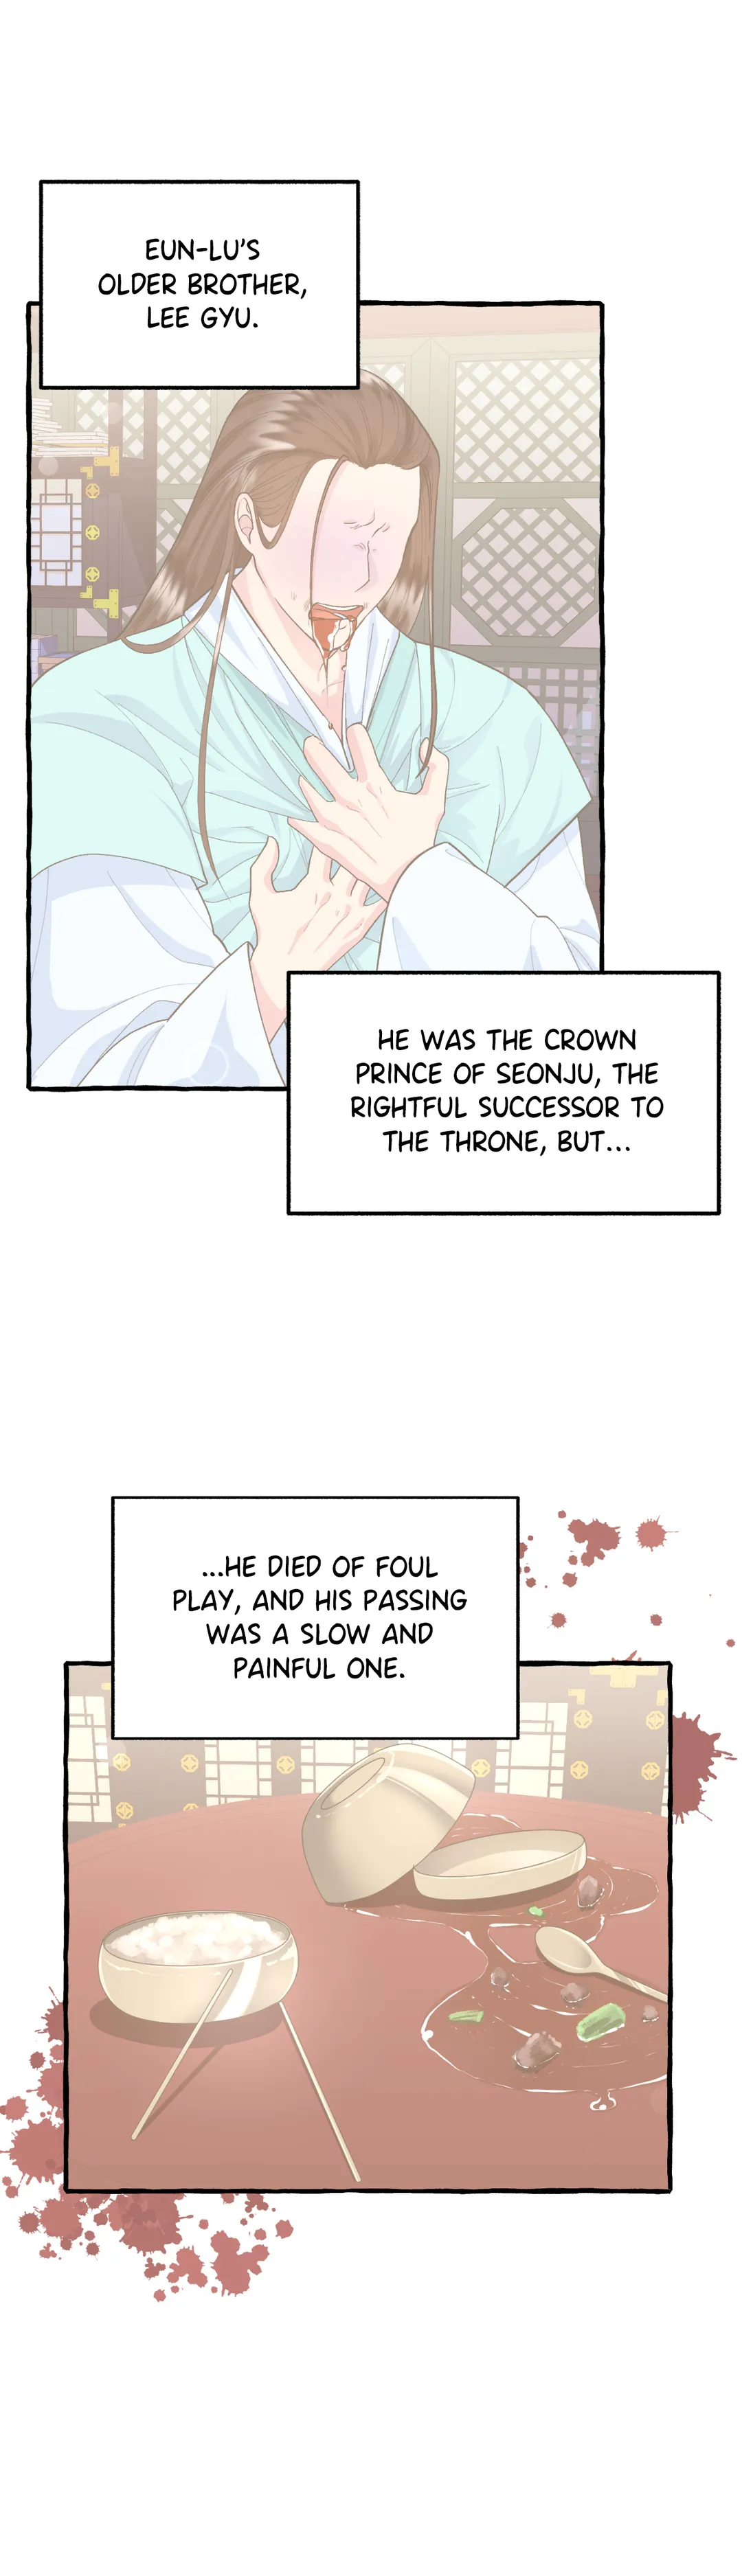 Cheer Up, Your Highness! chapter 11